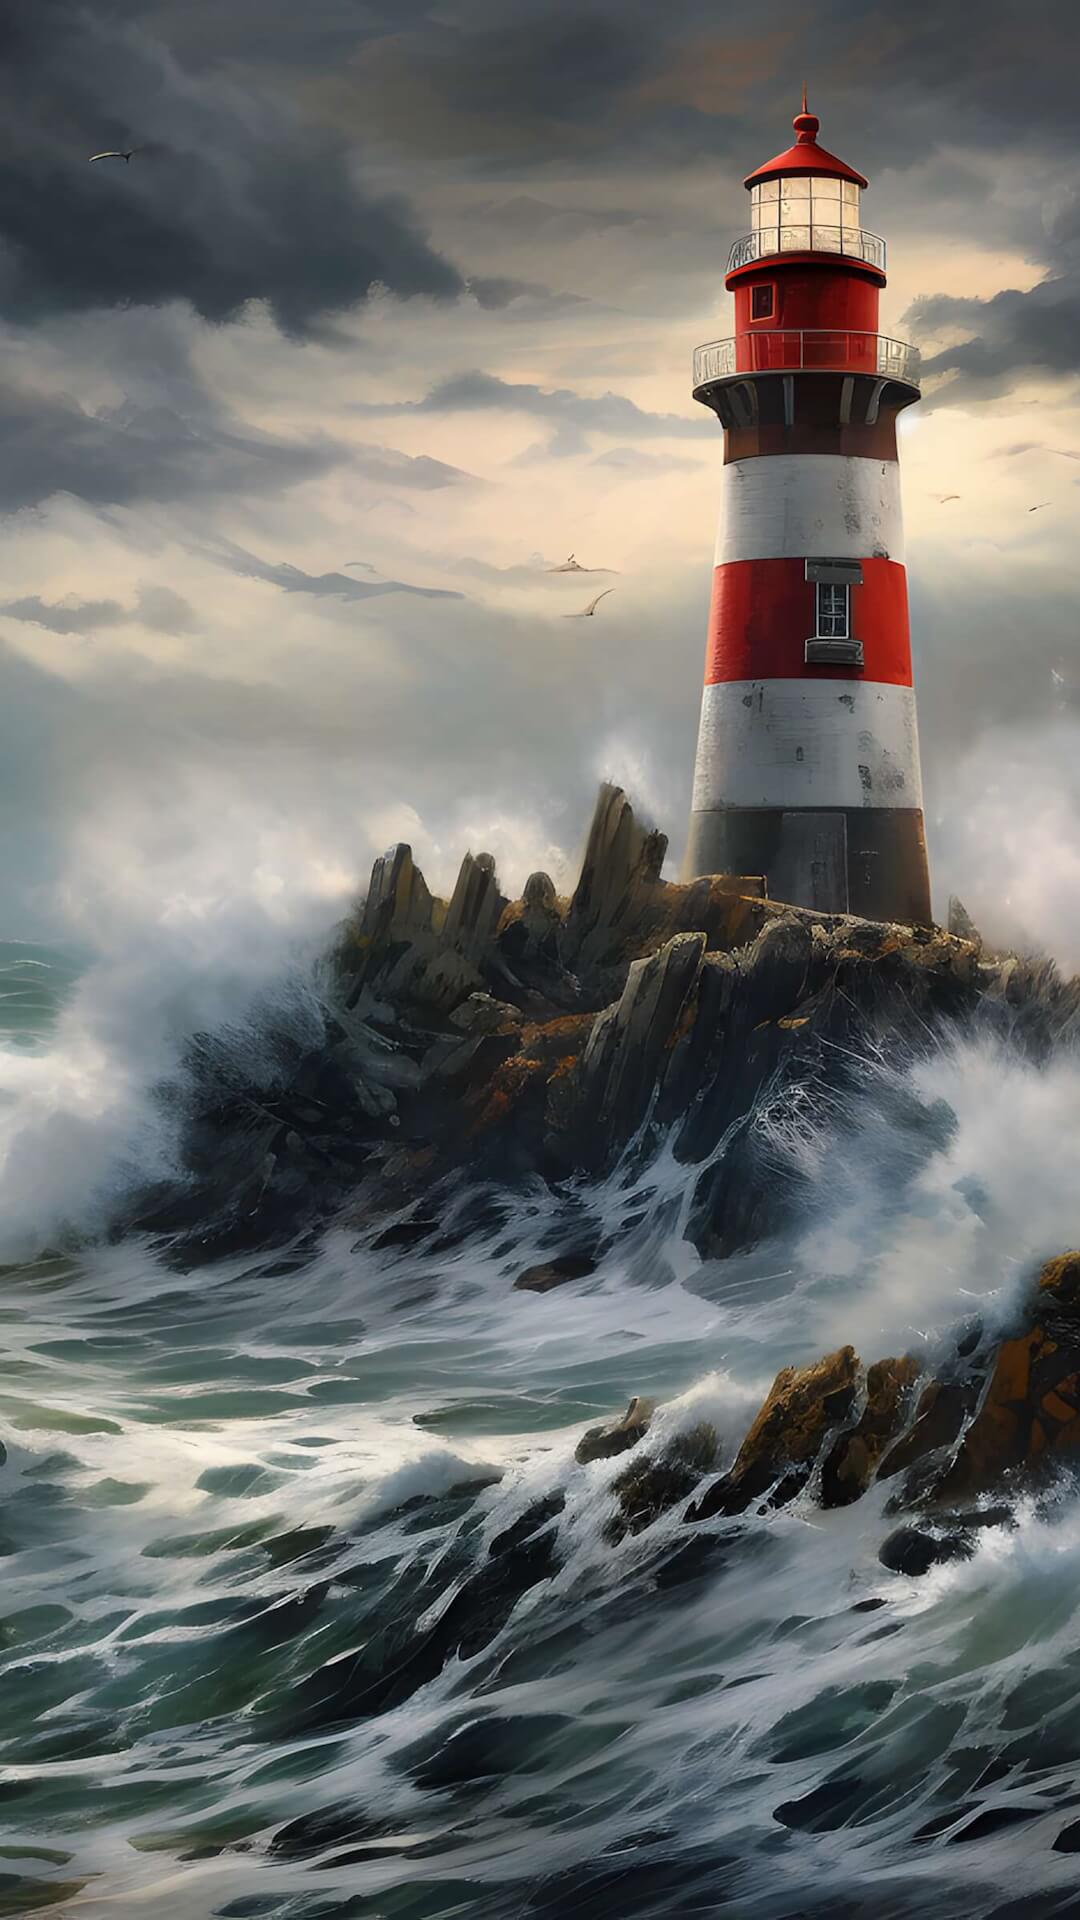 Lighthouse in the ocean waves wallpaper 1080x1920